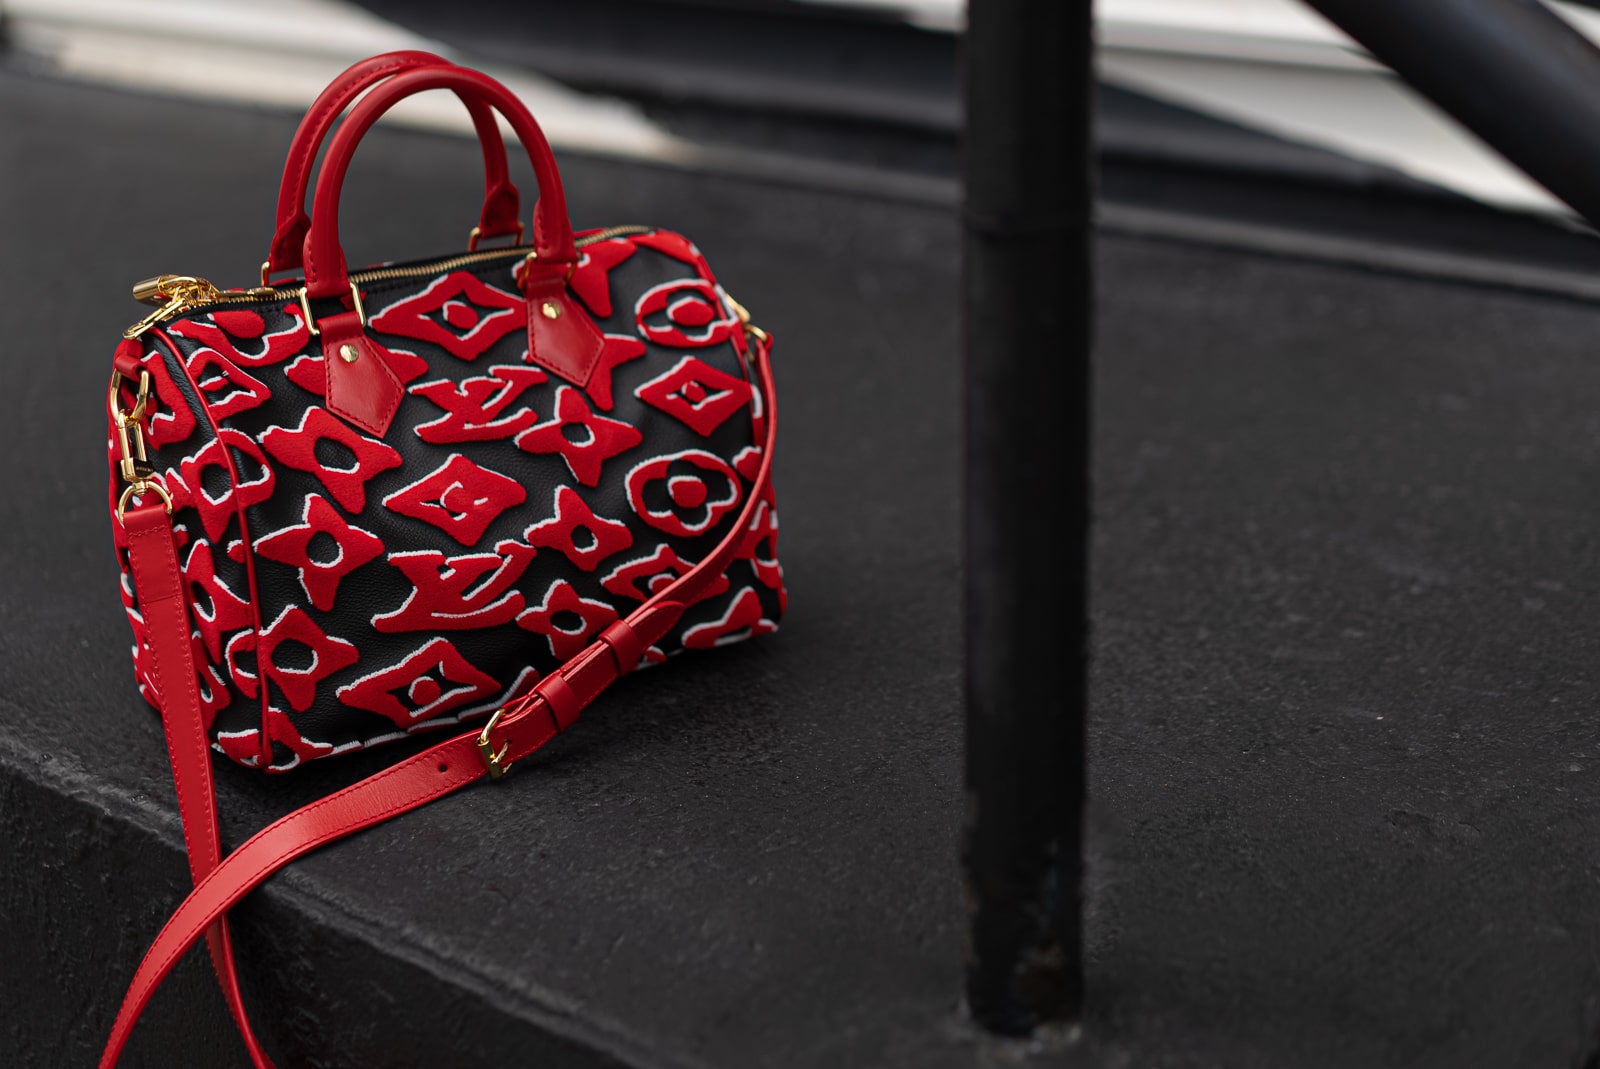 Louis Vuitton Kicks Off the New Year with Urs Fischer Collaboration